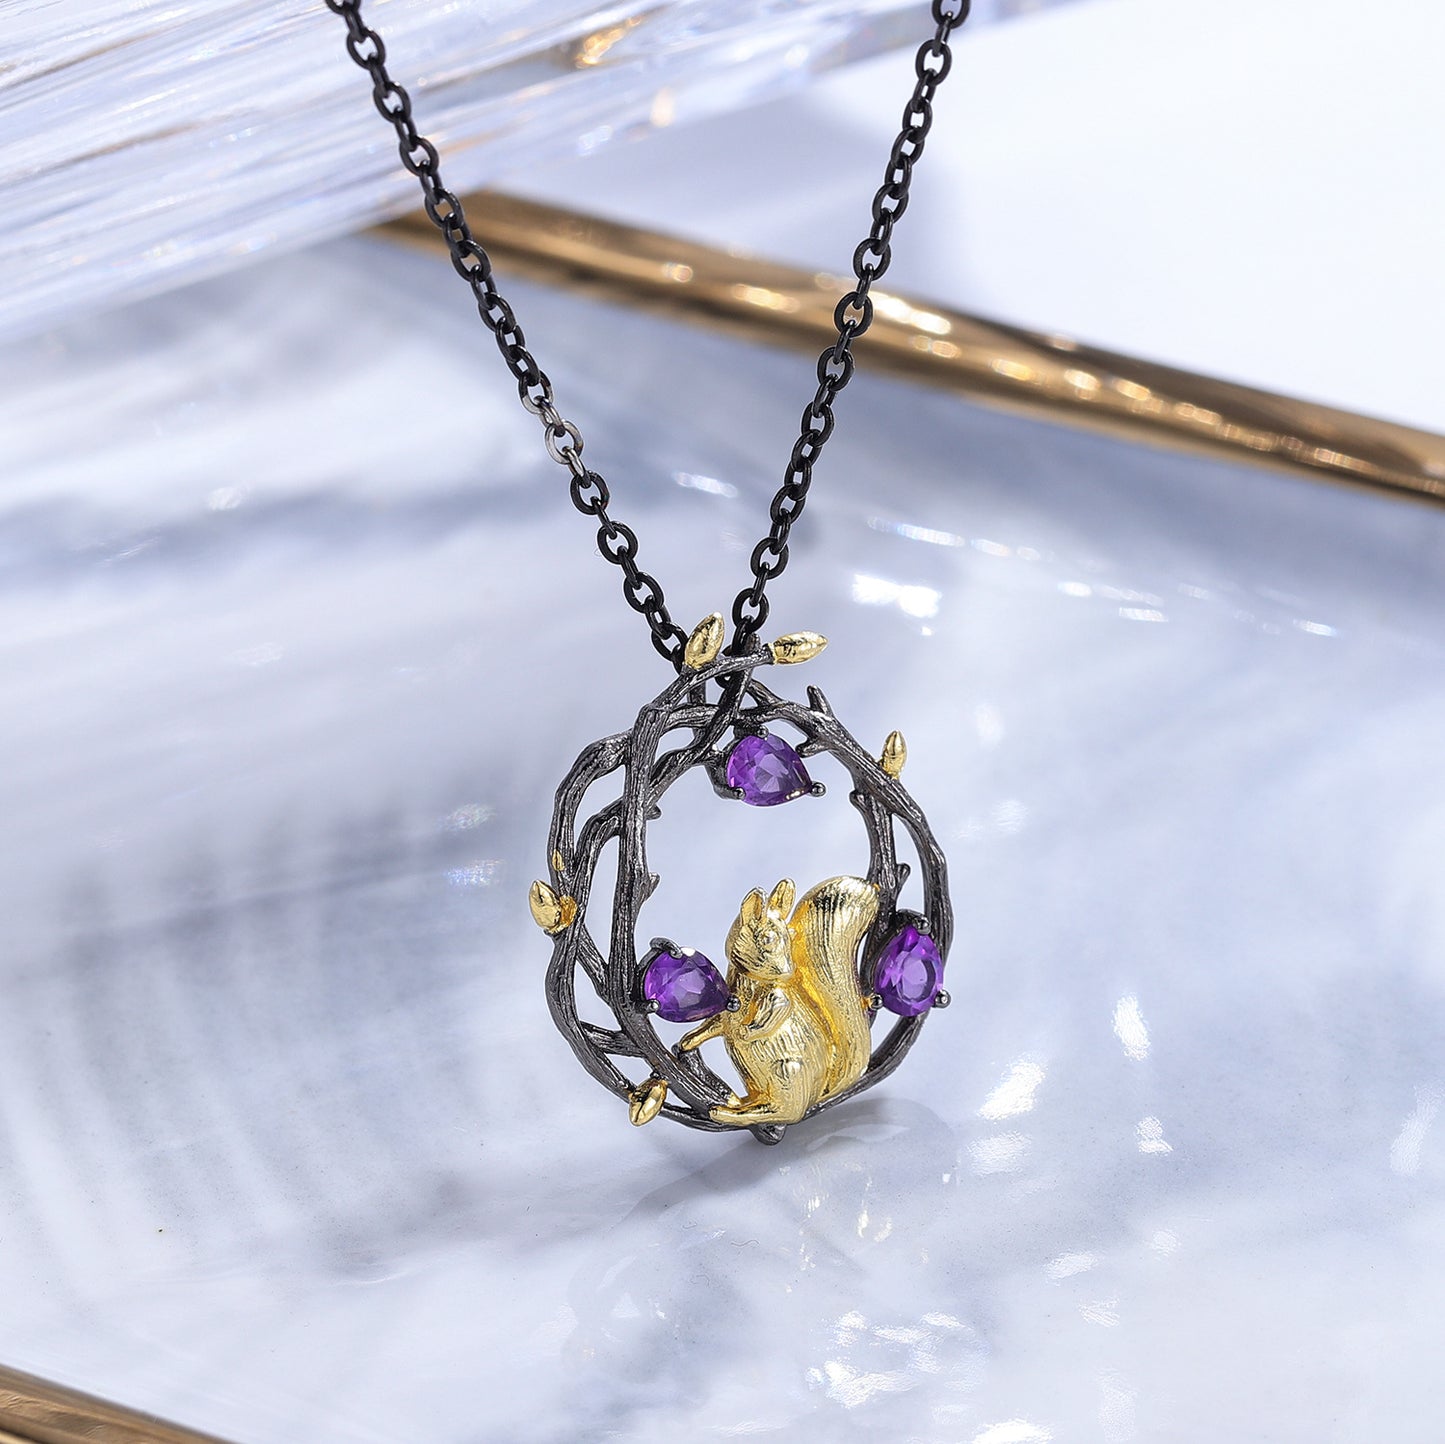 Original Design High Sense Jewelry Inlaid Colourful Gemstone Little Squirrel Pendant Sterling Silver Necklace for Women